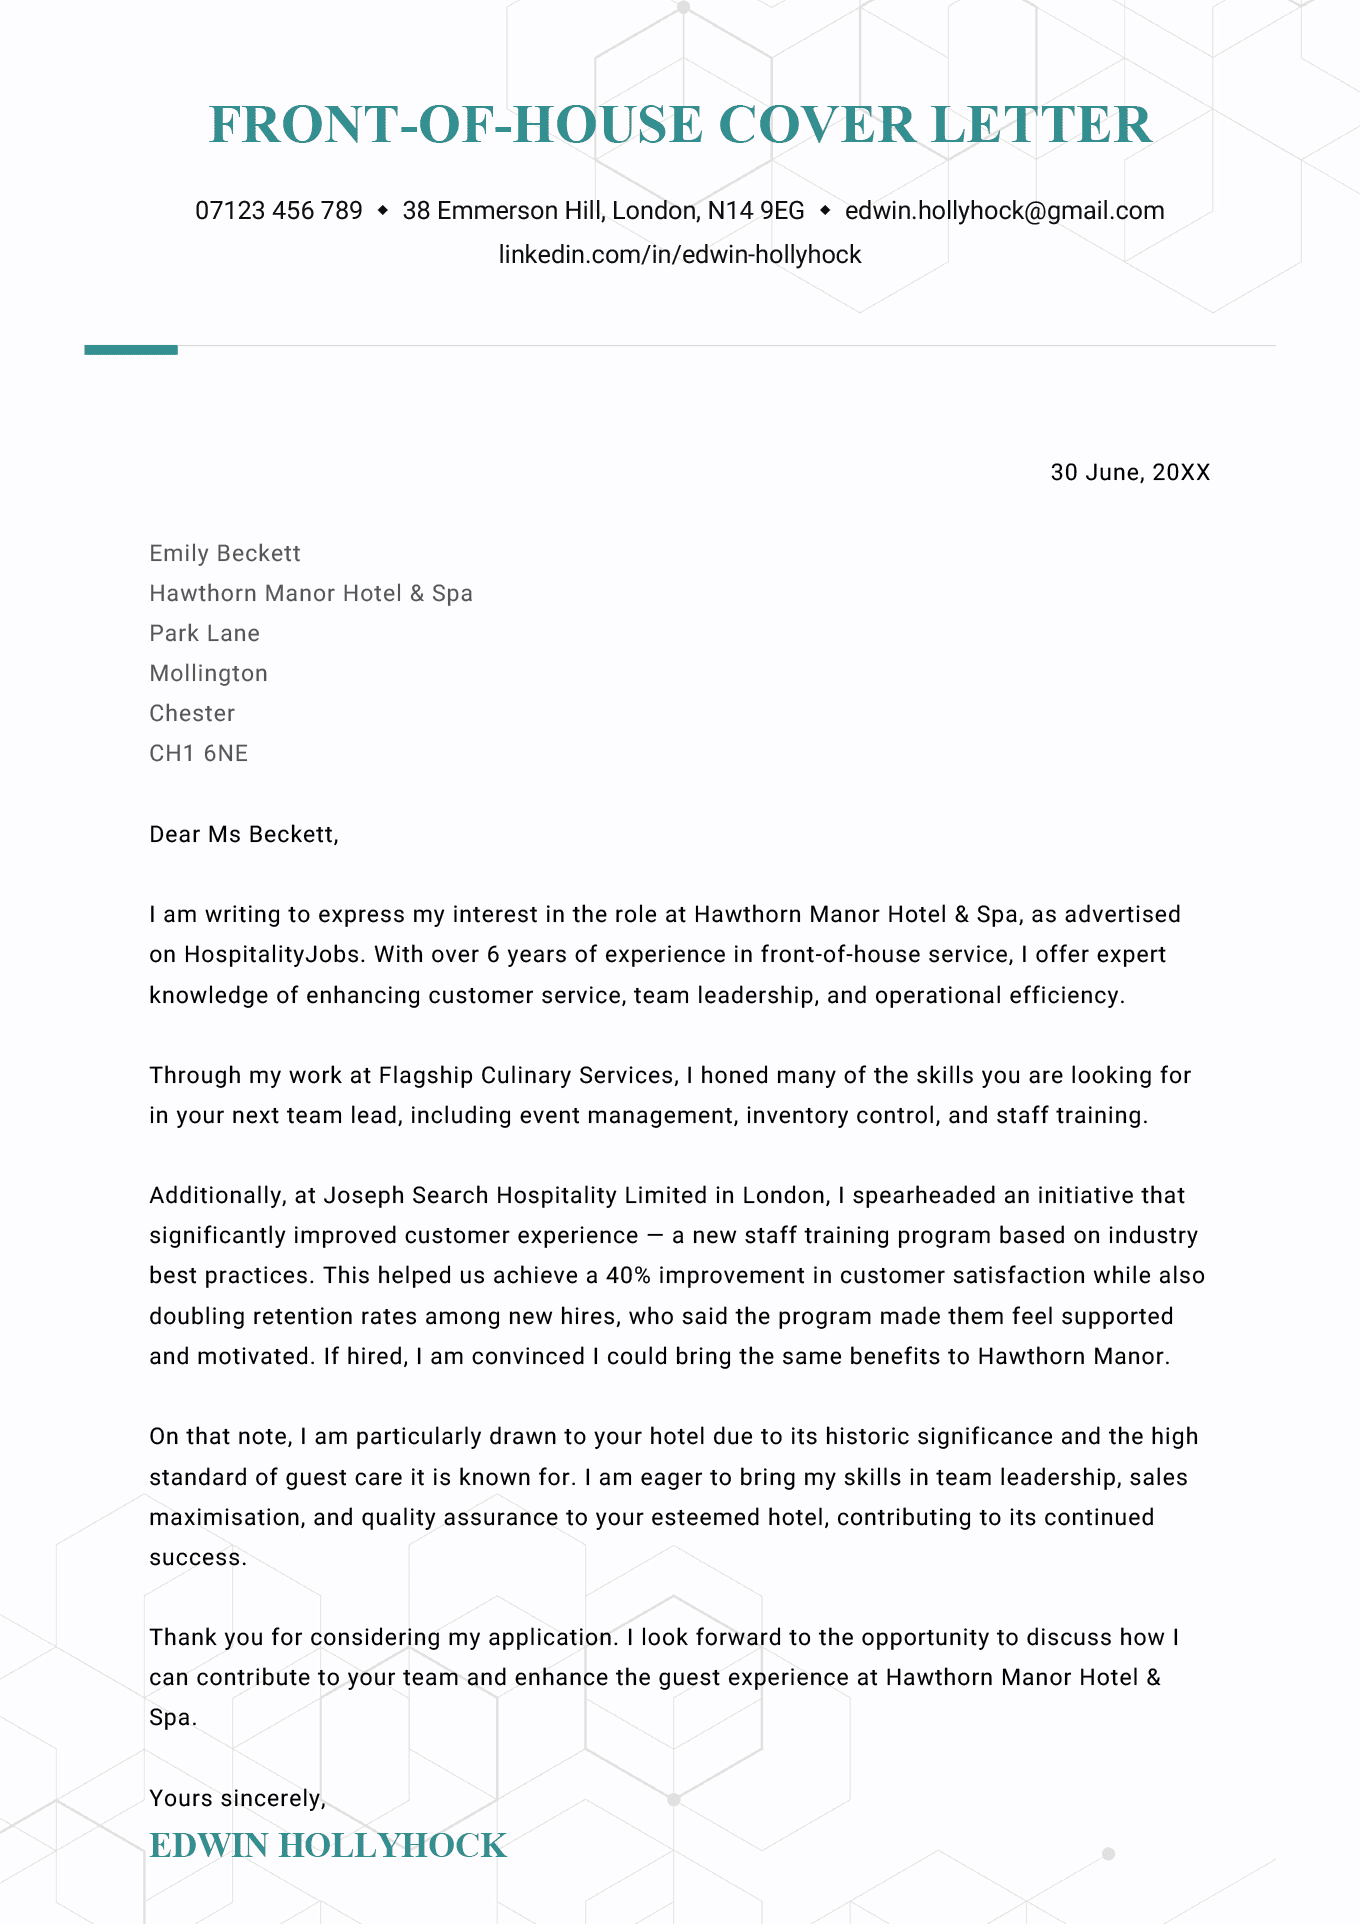 A front-of-house cover letter example with blue header text and several paragraphs outlining the applicants unique strengths and qualifications.